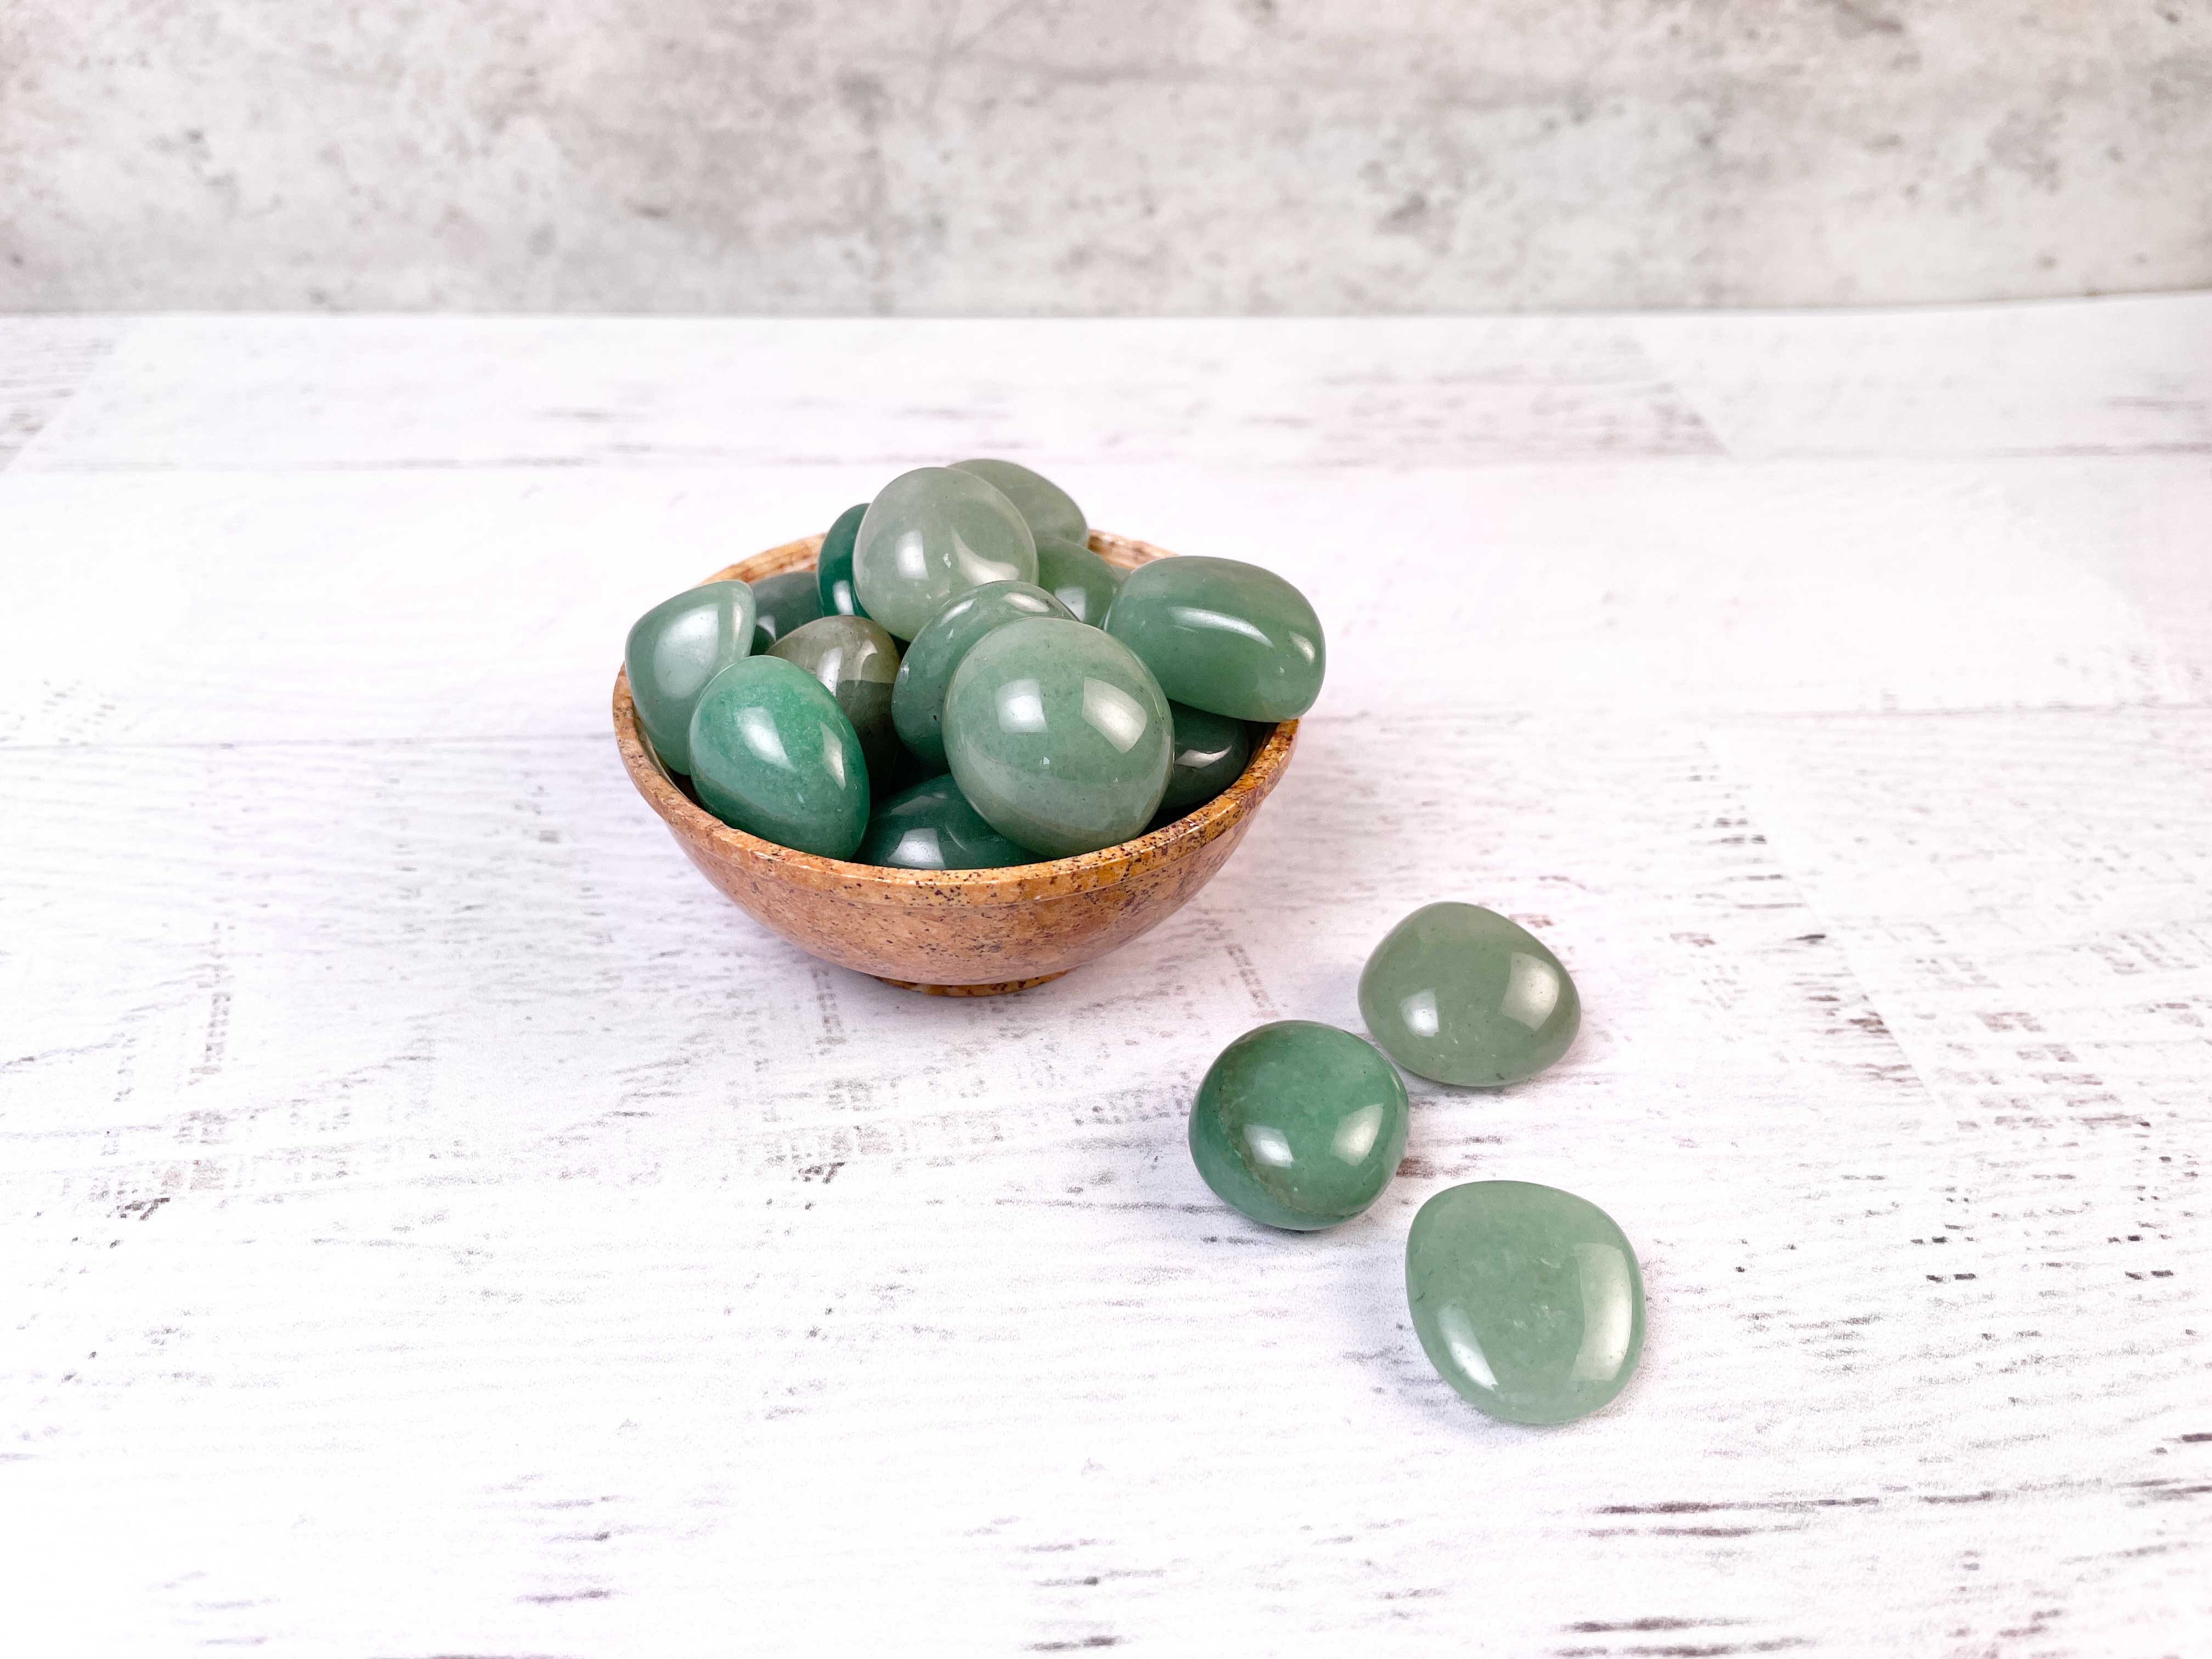 Buy Online Latest and Unique Tumbled Green Aventurine- Abundance, Prosperity, Luck, Wealth | Shop Best Spiritual Items - The Mystical Ritual